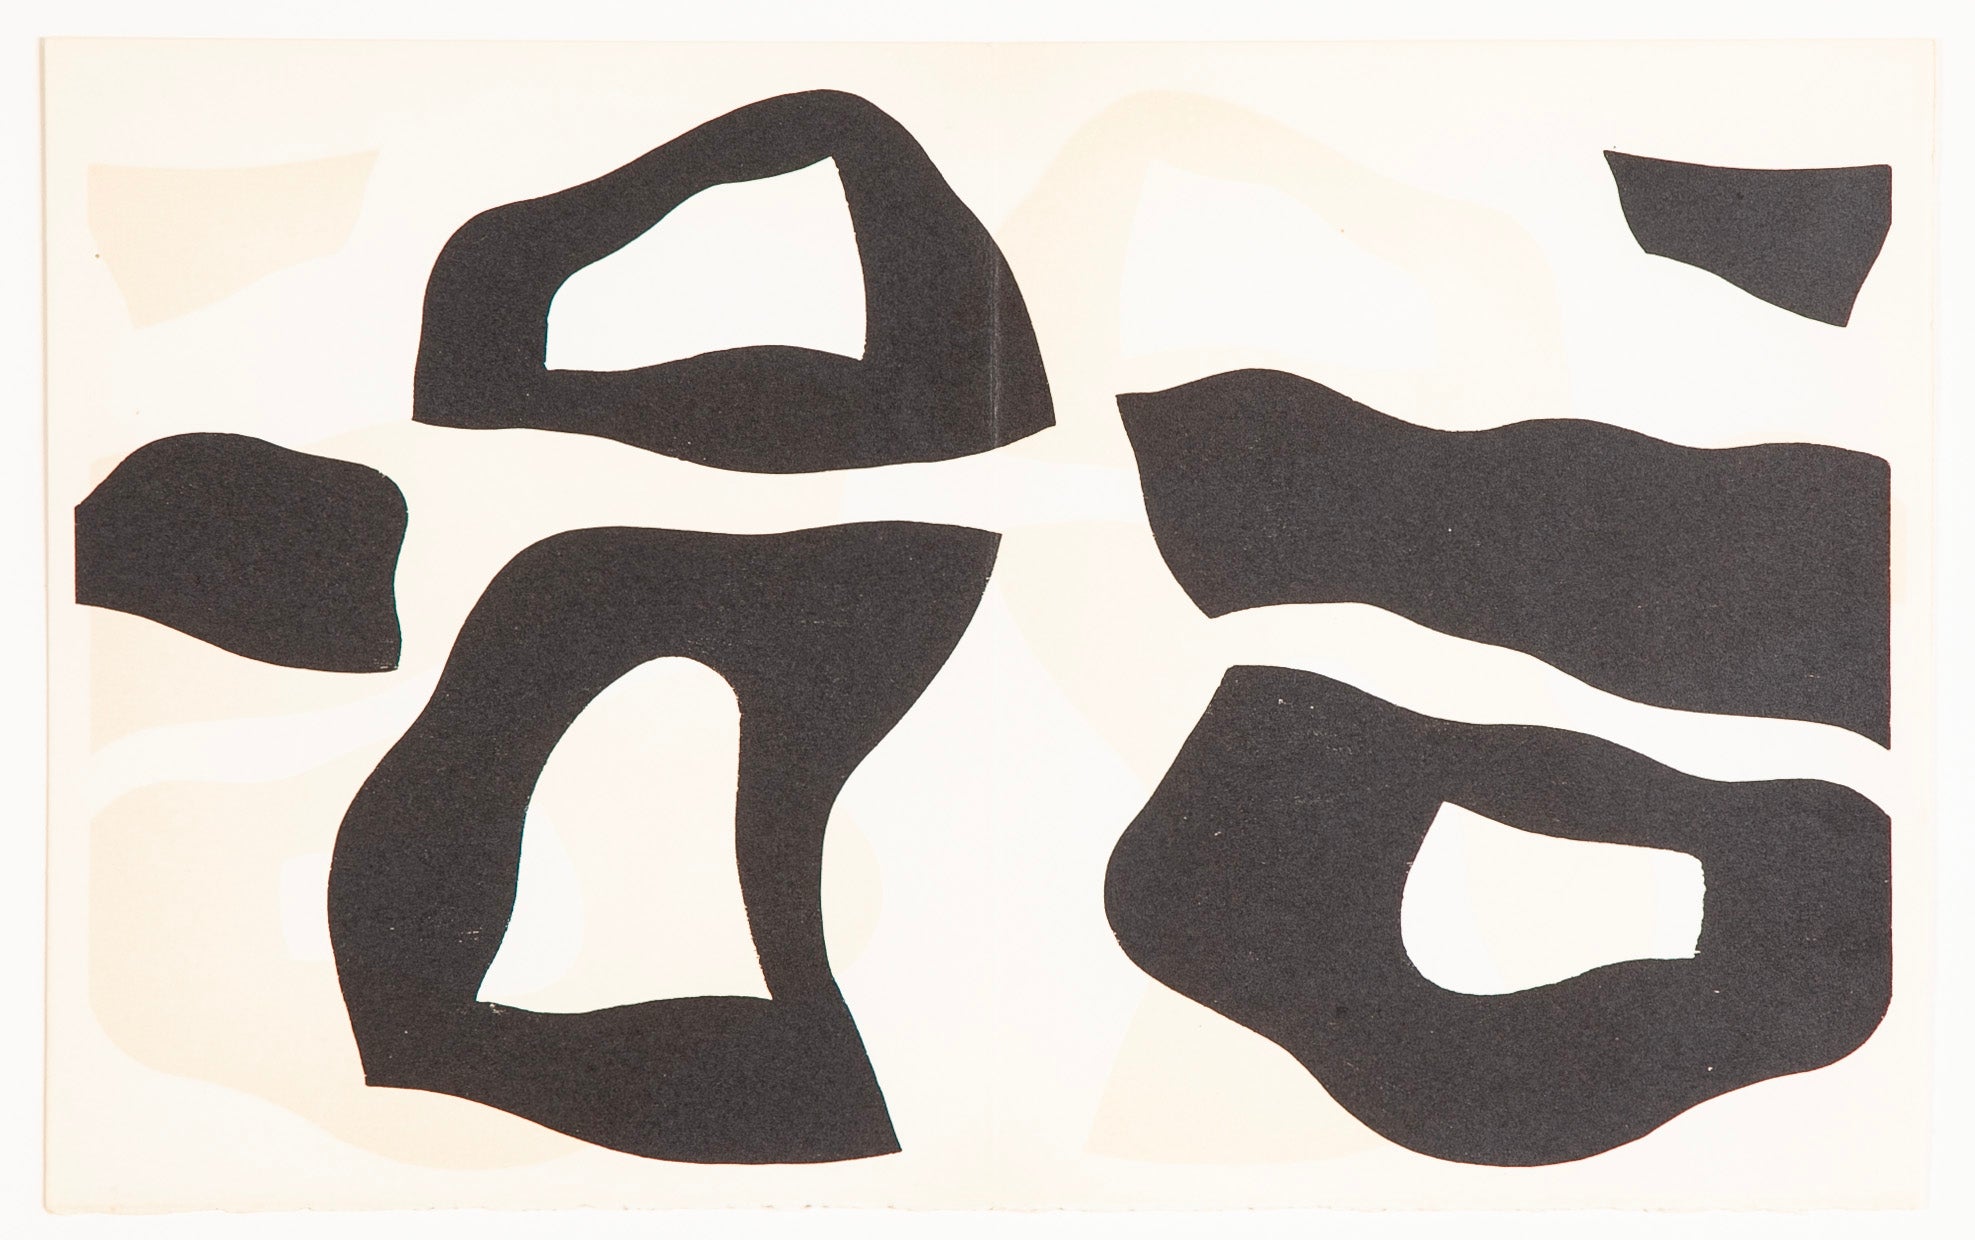 Three Woodcuts on Arches from "Dreams & Projects" by Jean Hans Arp